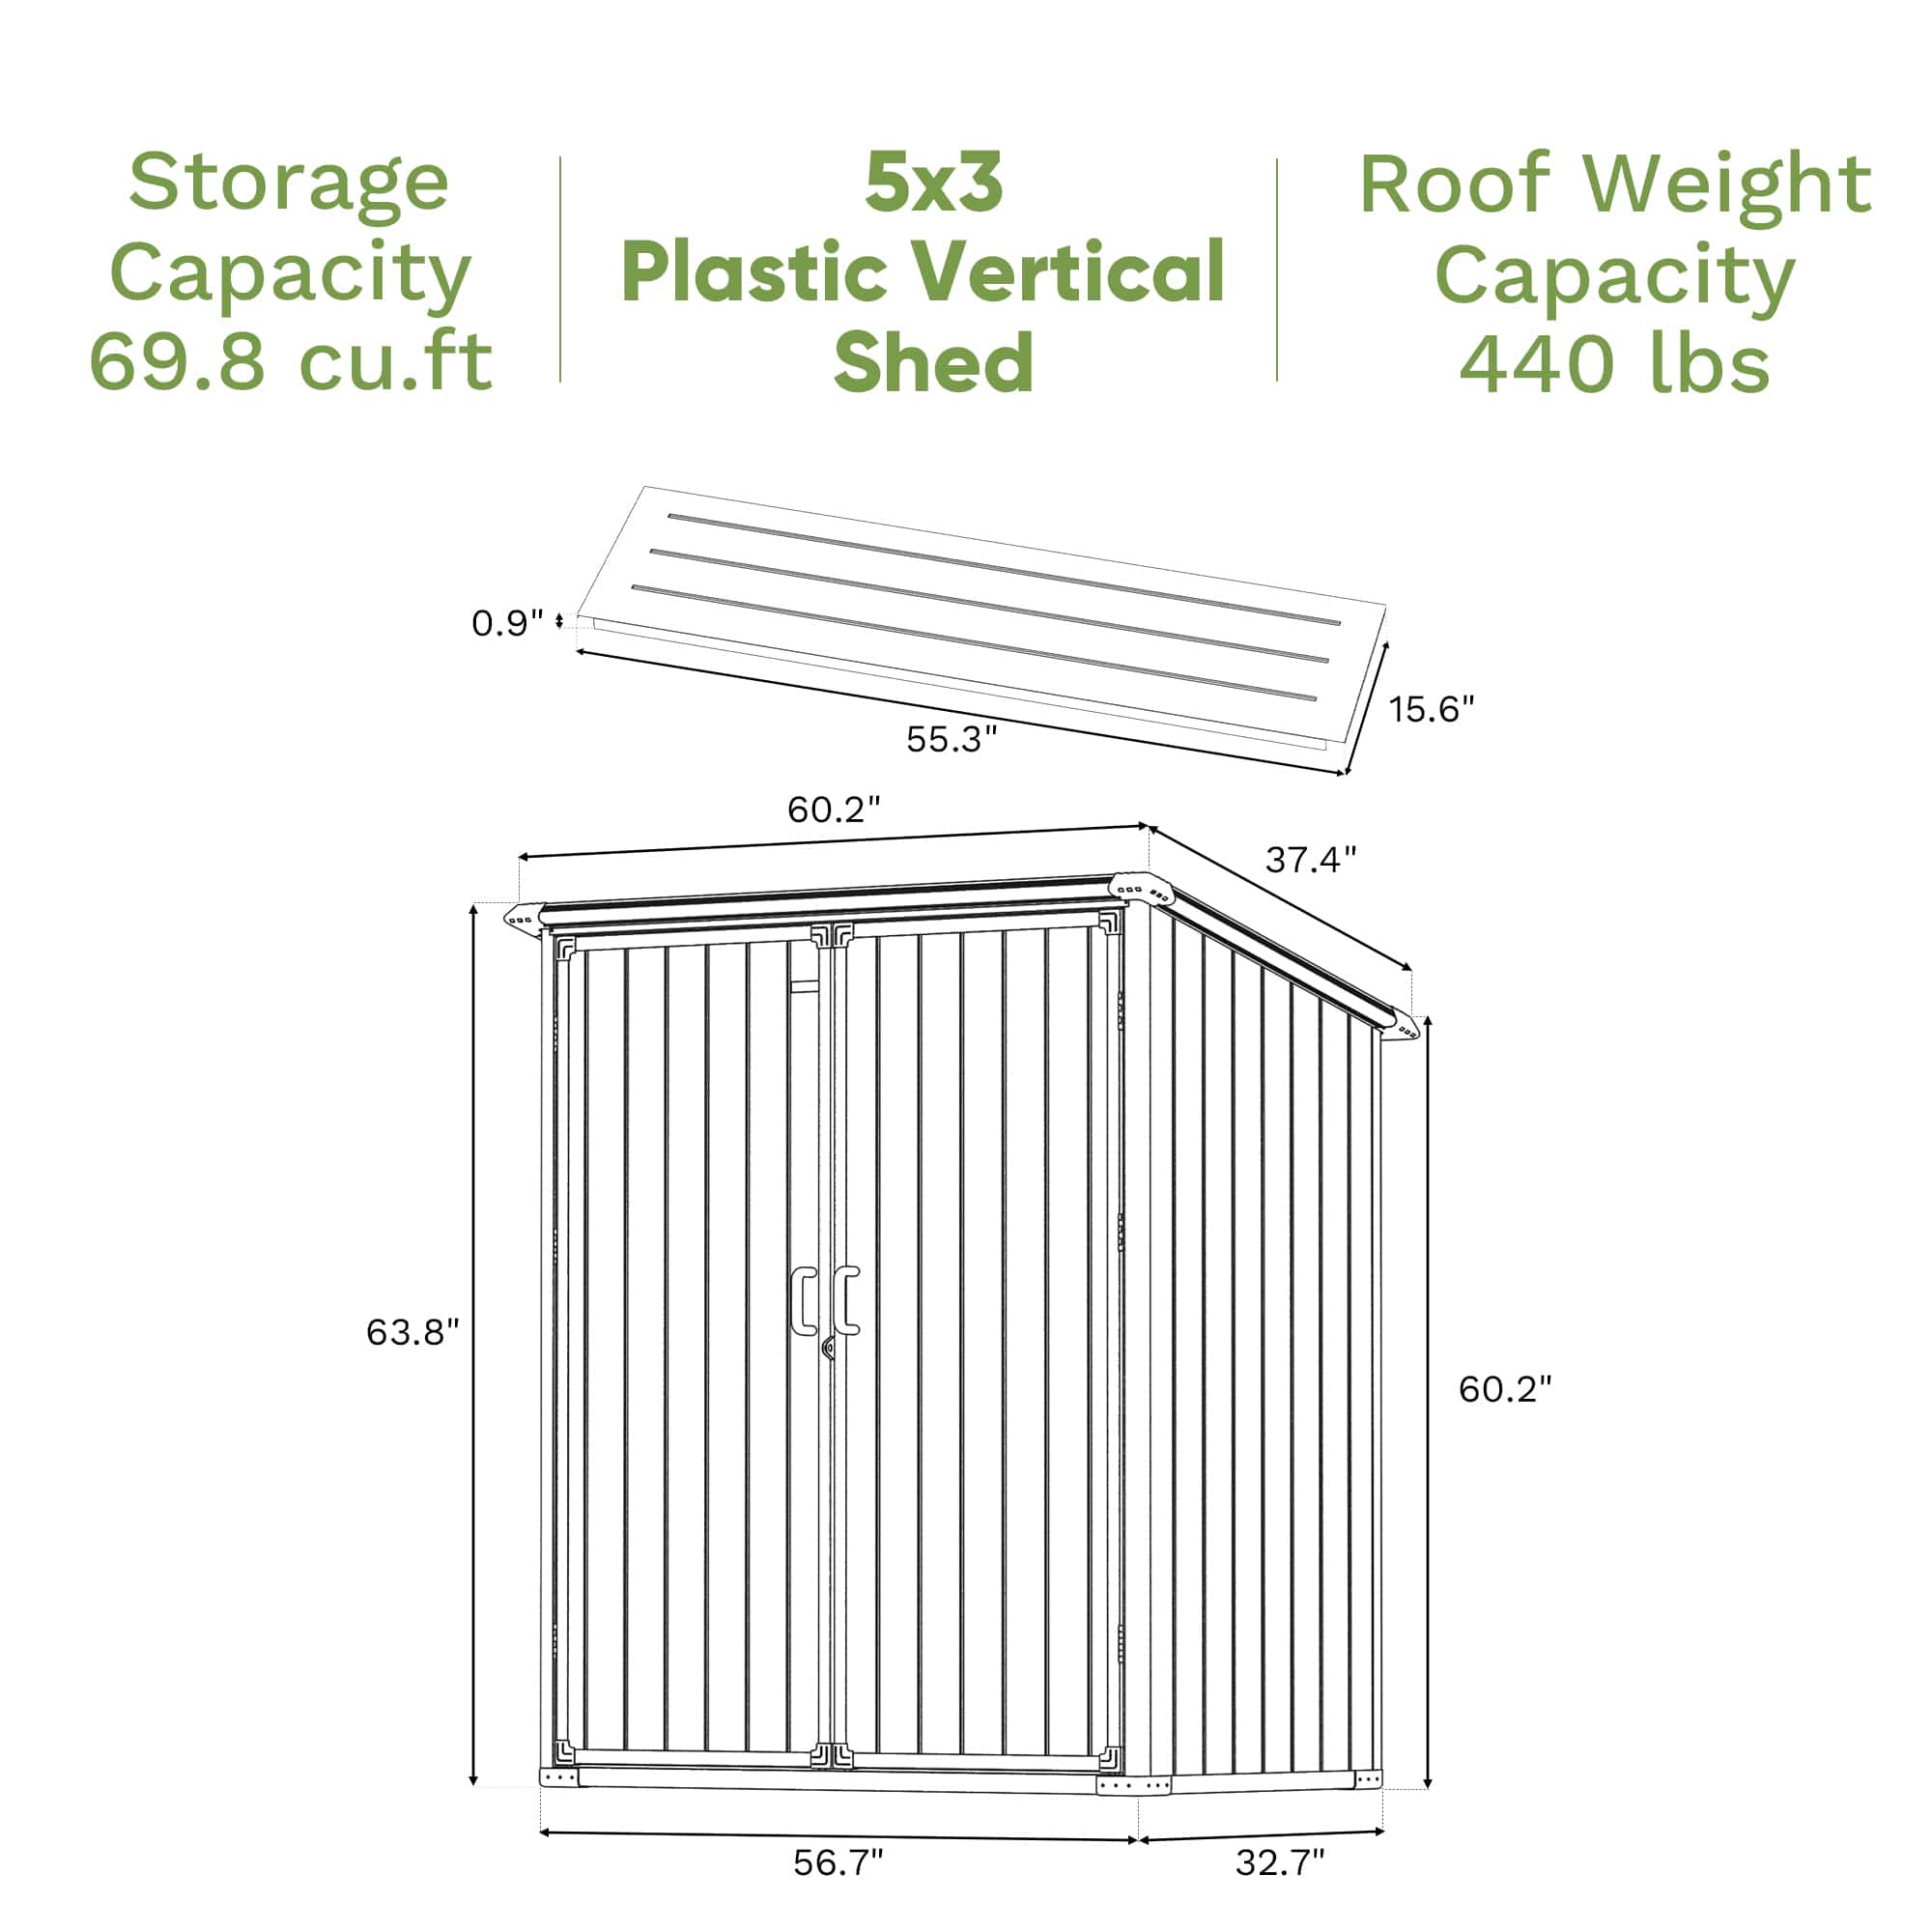 Patiowell 5x3 Plastic Vertical Shed Pro